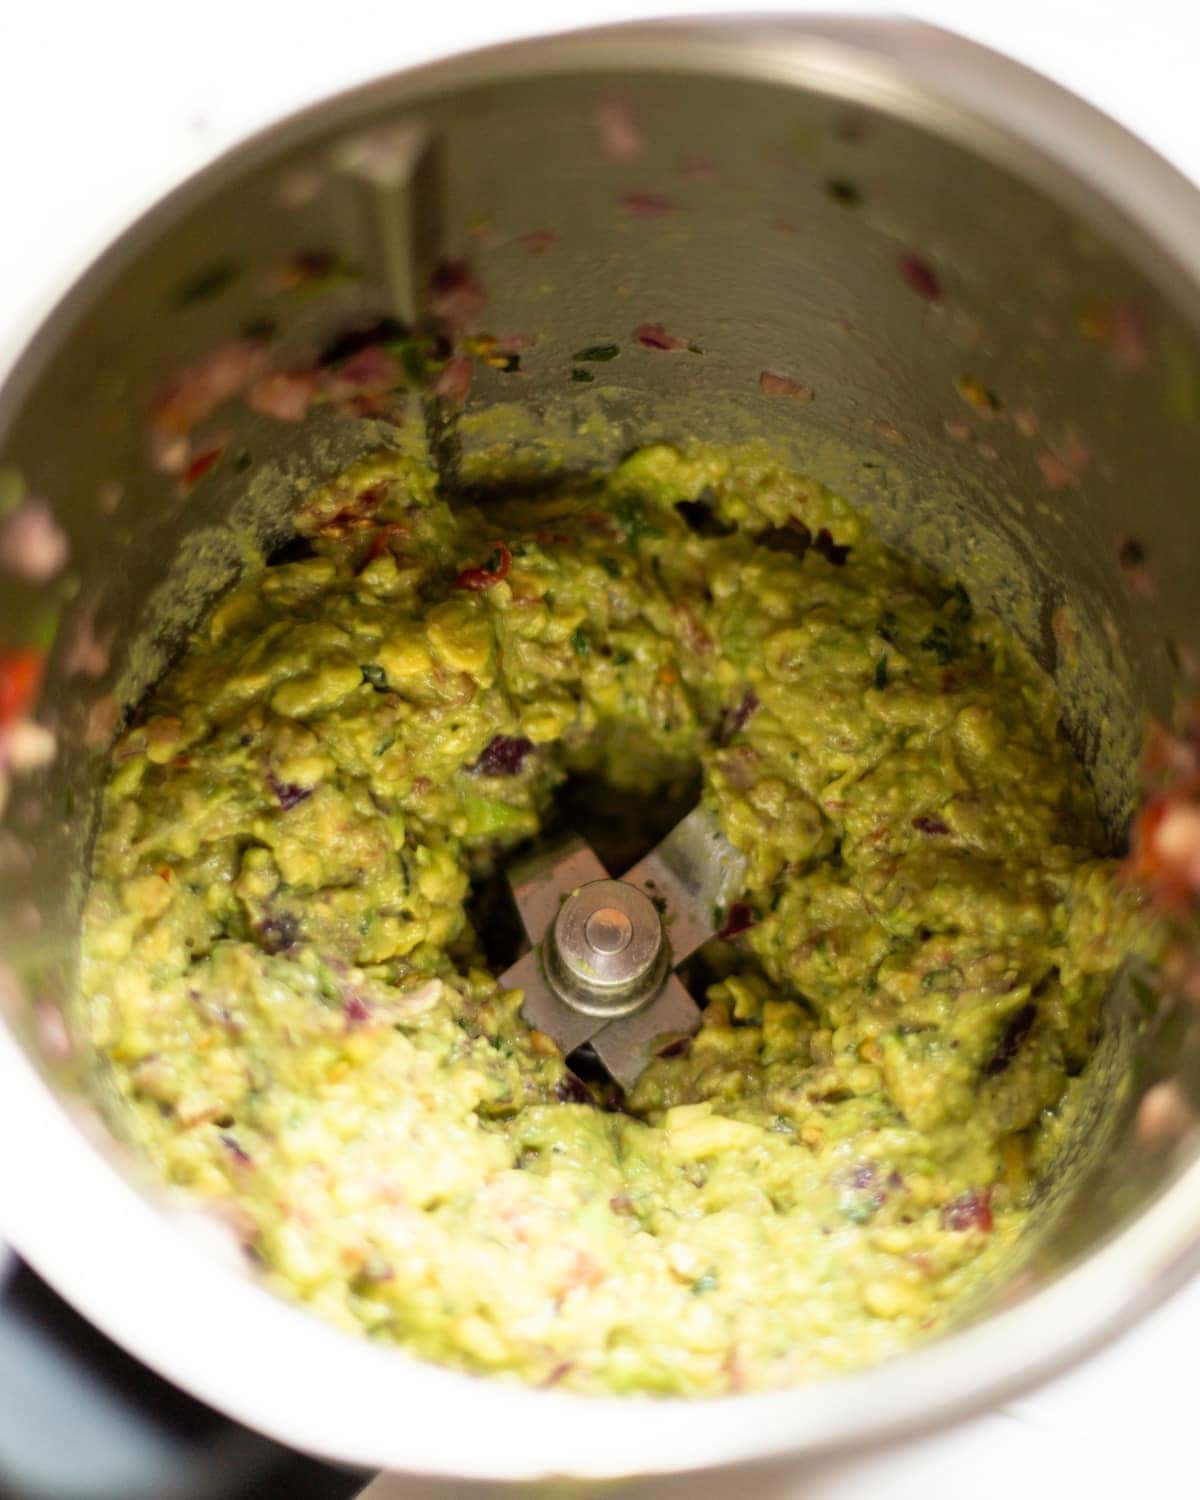 The finished guacamole, inside the Thermomix jug.